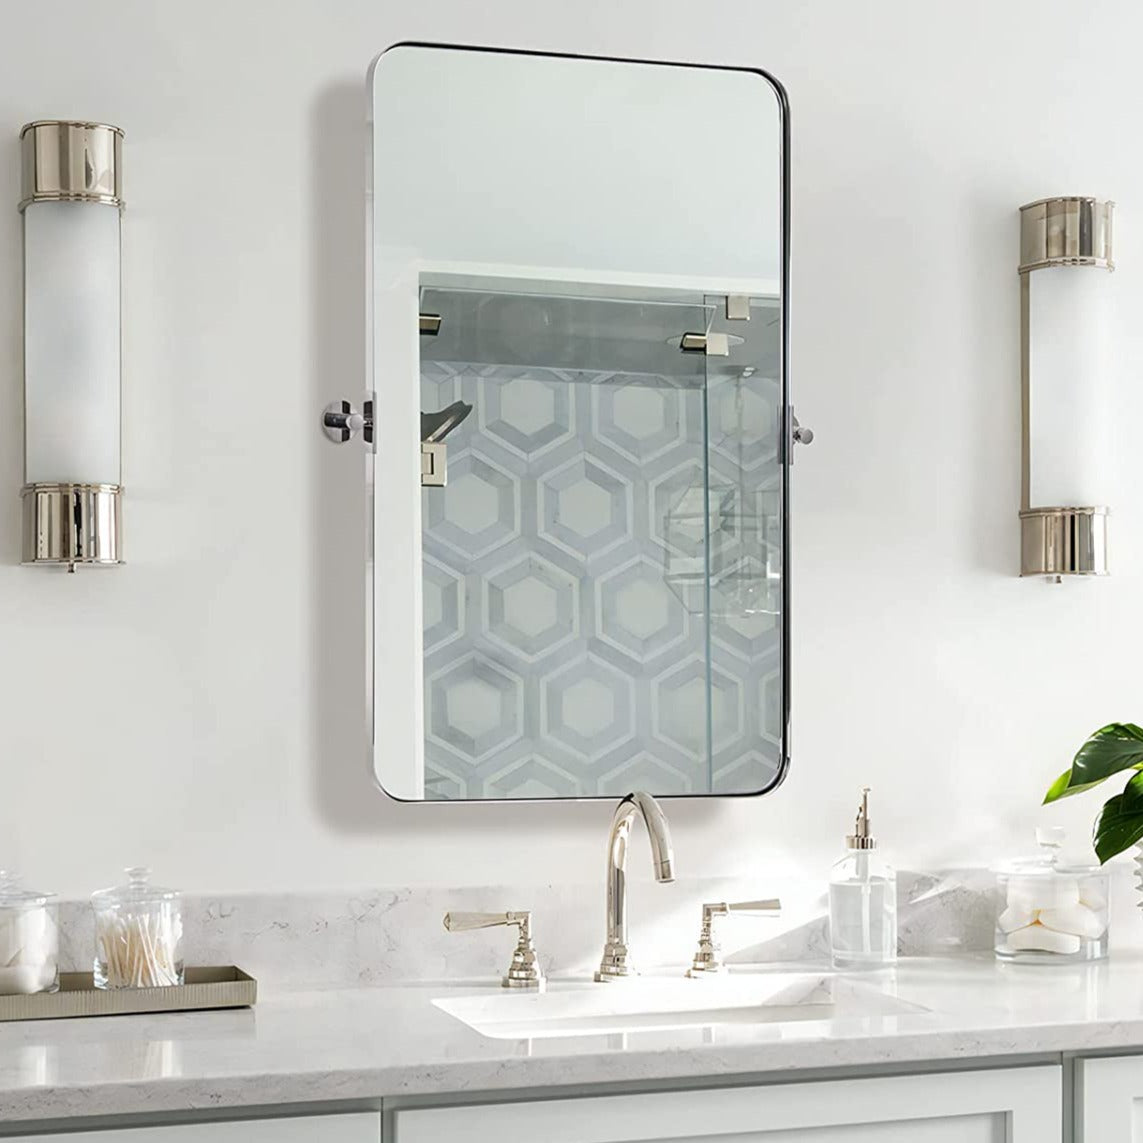 Modern Tilting Pivot Mirror for Bathroom Vanity Rounded Rectangle Mirror Adjustable Swivel Wall Mirror| Stainless Steel Frame Mounted Vertically #color_polished chrome